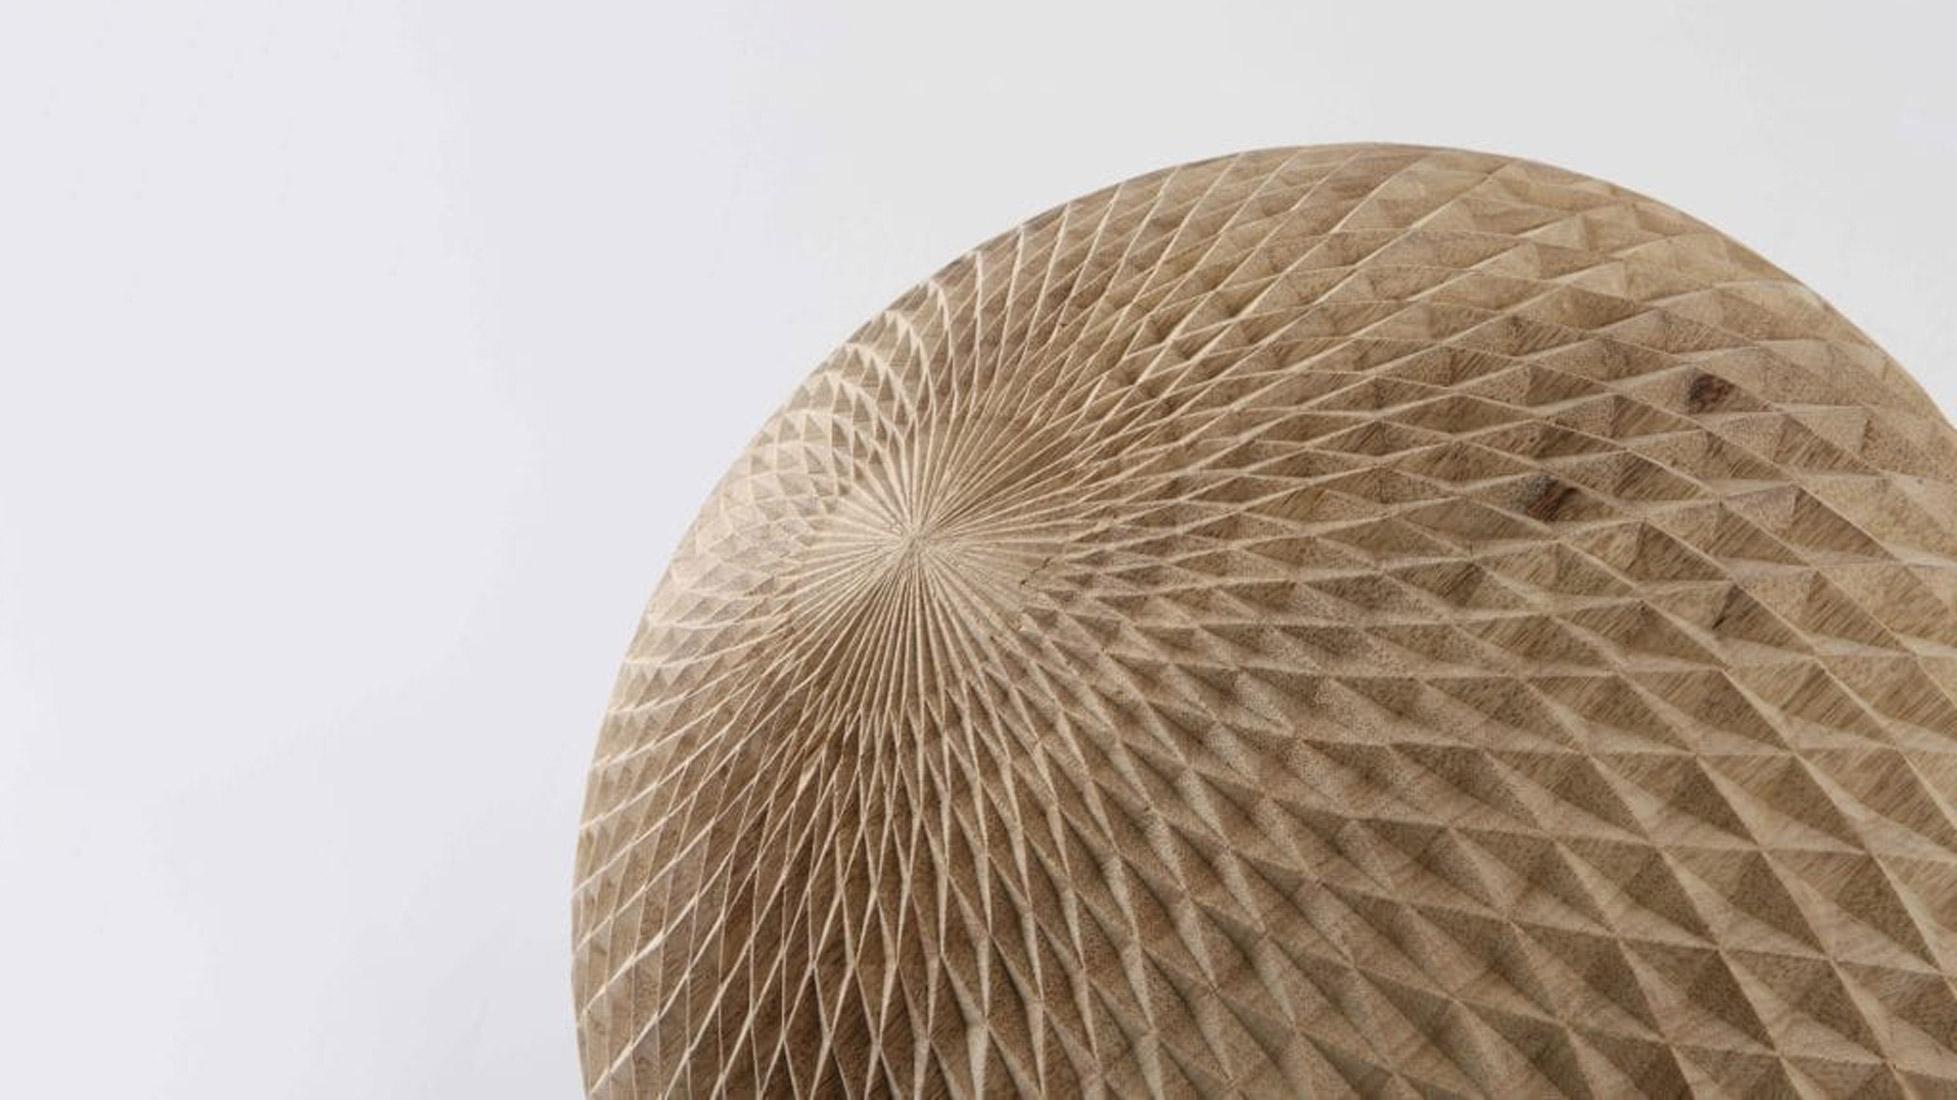 Spiritual Sphere was designed by Nada Debs in carved frakke (Limba, a West African wood) crafted.

About the designer.
Nada Debs is a Lebanese designer living and working in Beirut. Her work spans scale and discipline: from product and furniture